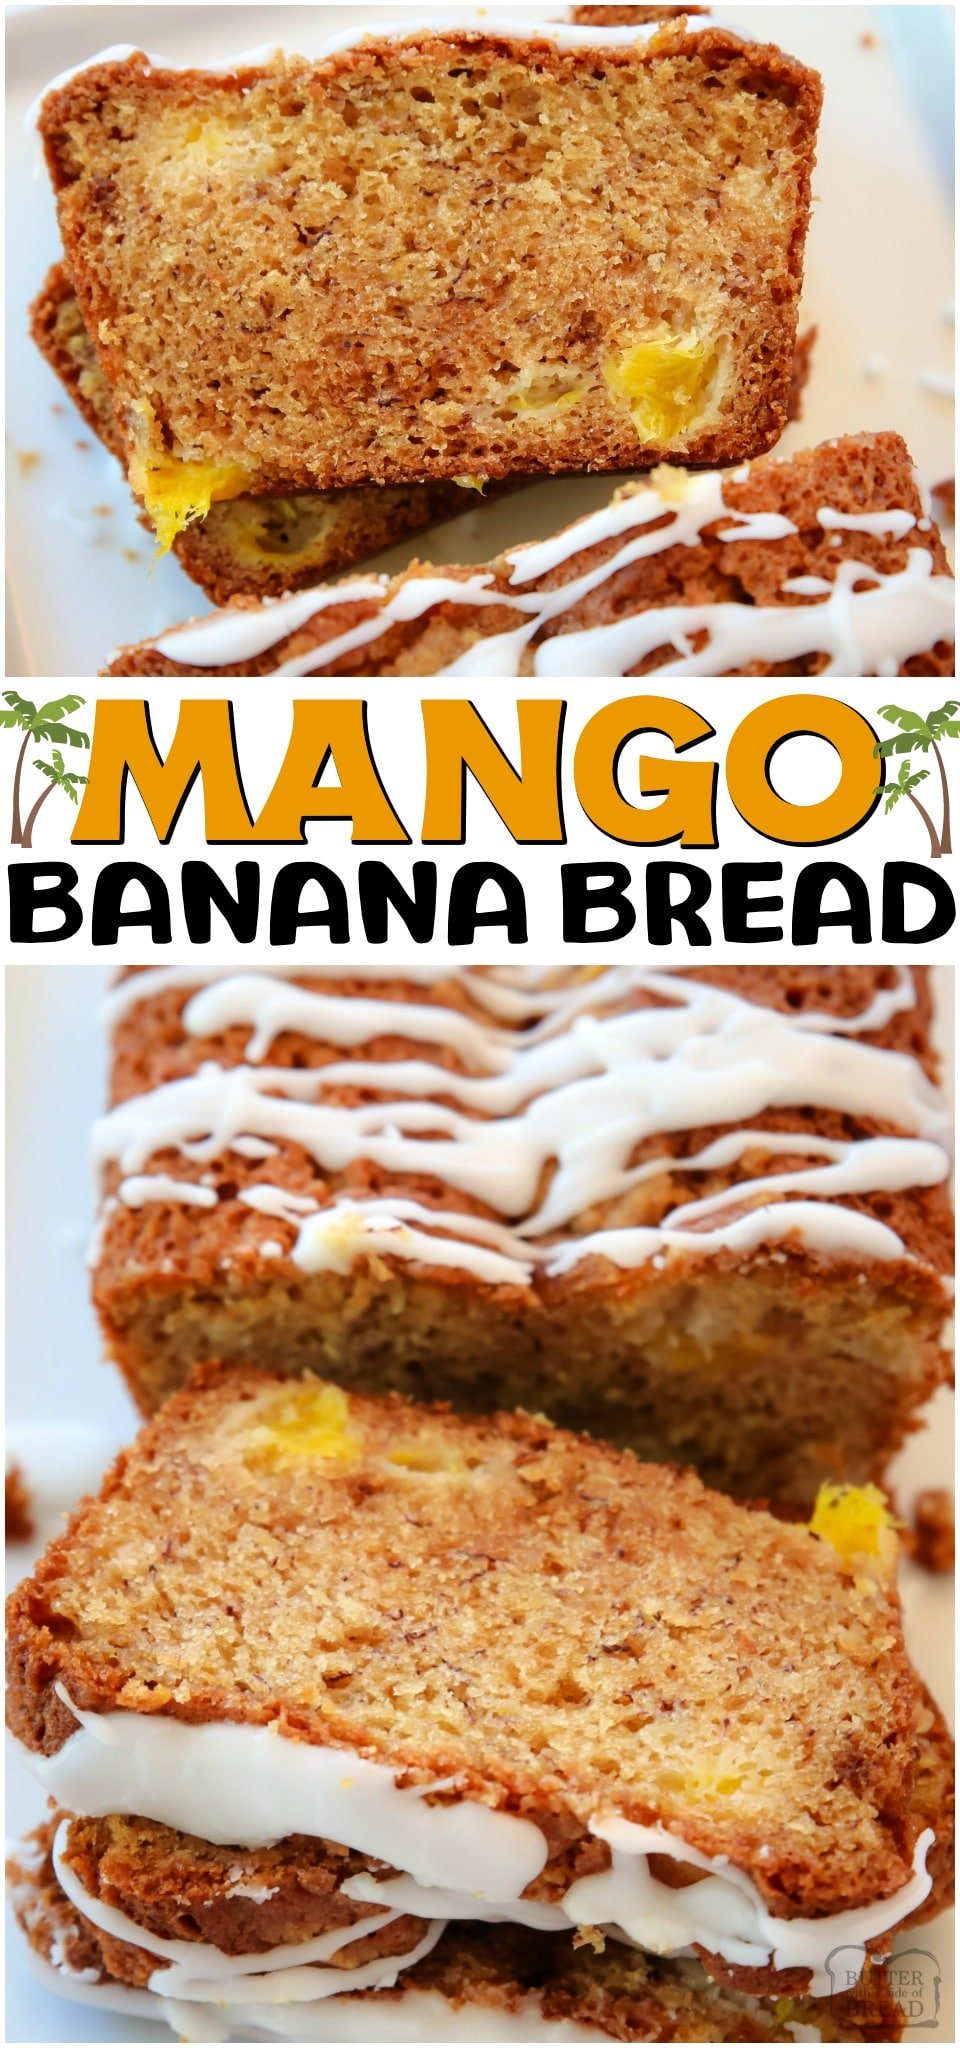 Mango Banana Bread made with ripe bananas and fresh mango, topped with a brown sugar streusel and drizzled with icing. A fantastic variation on a traditional banana bread recipe!